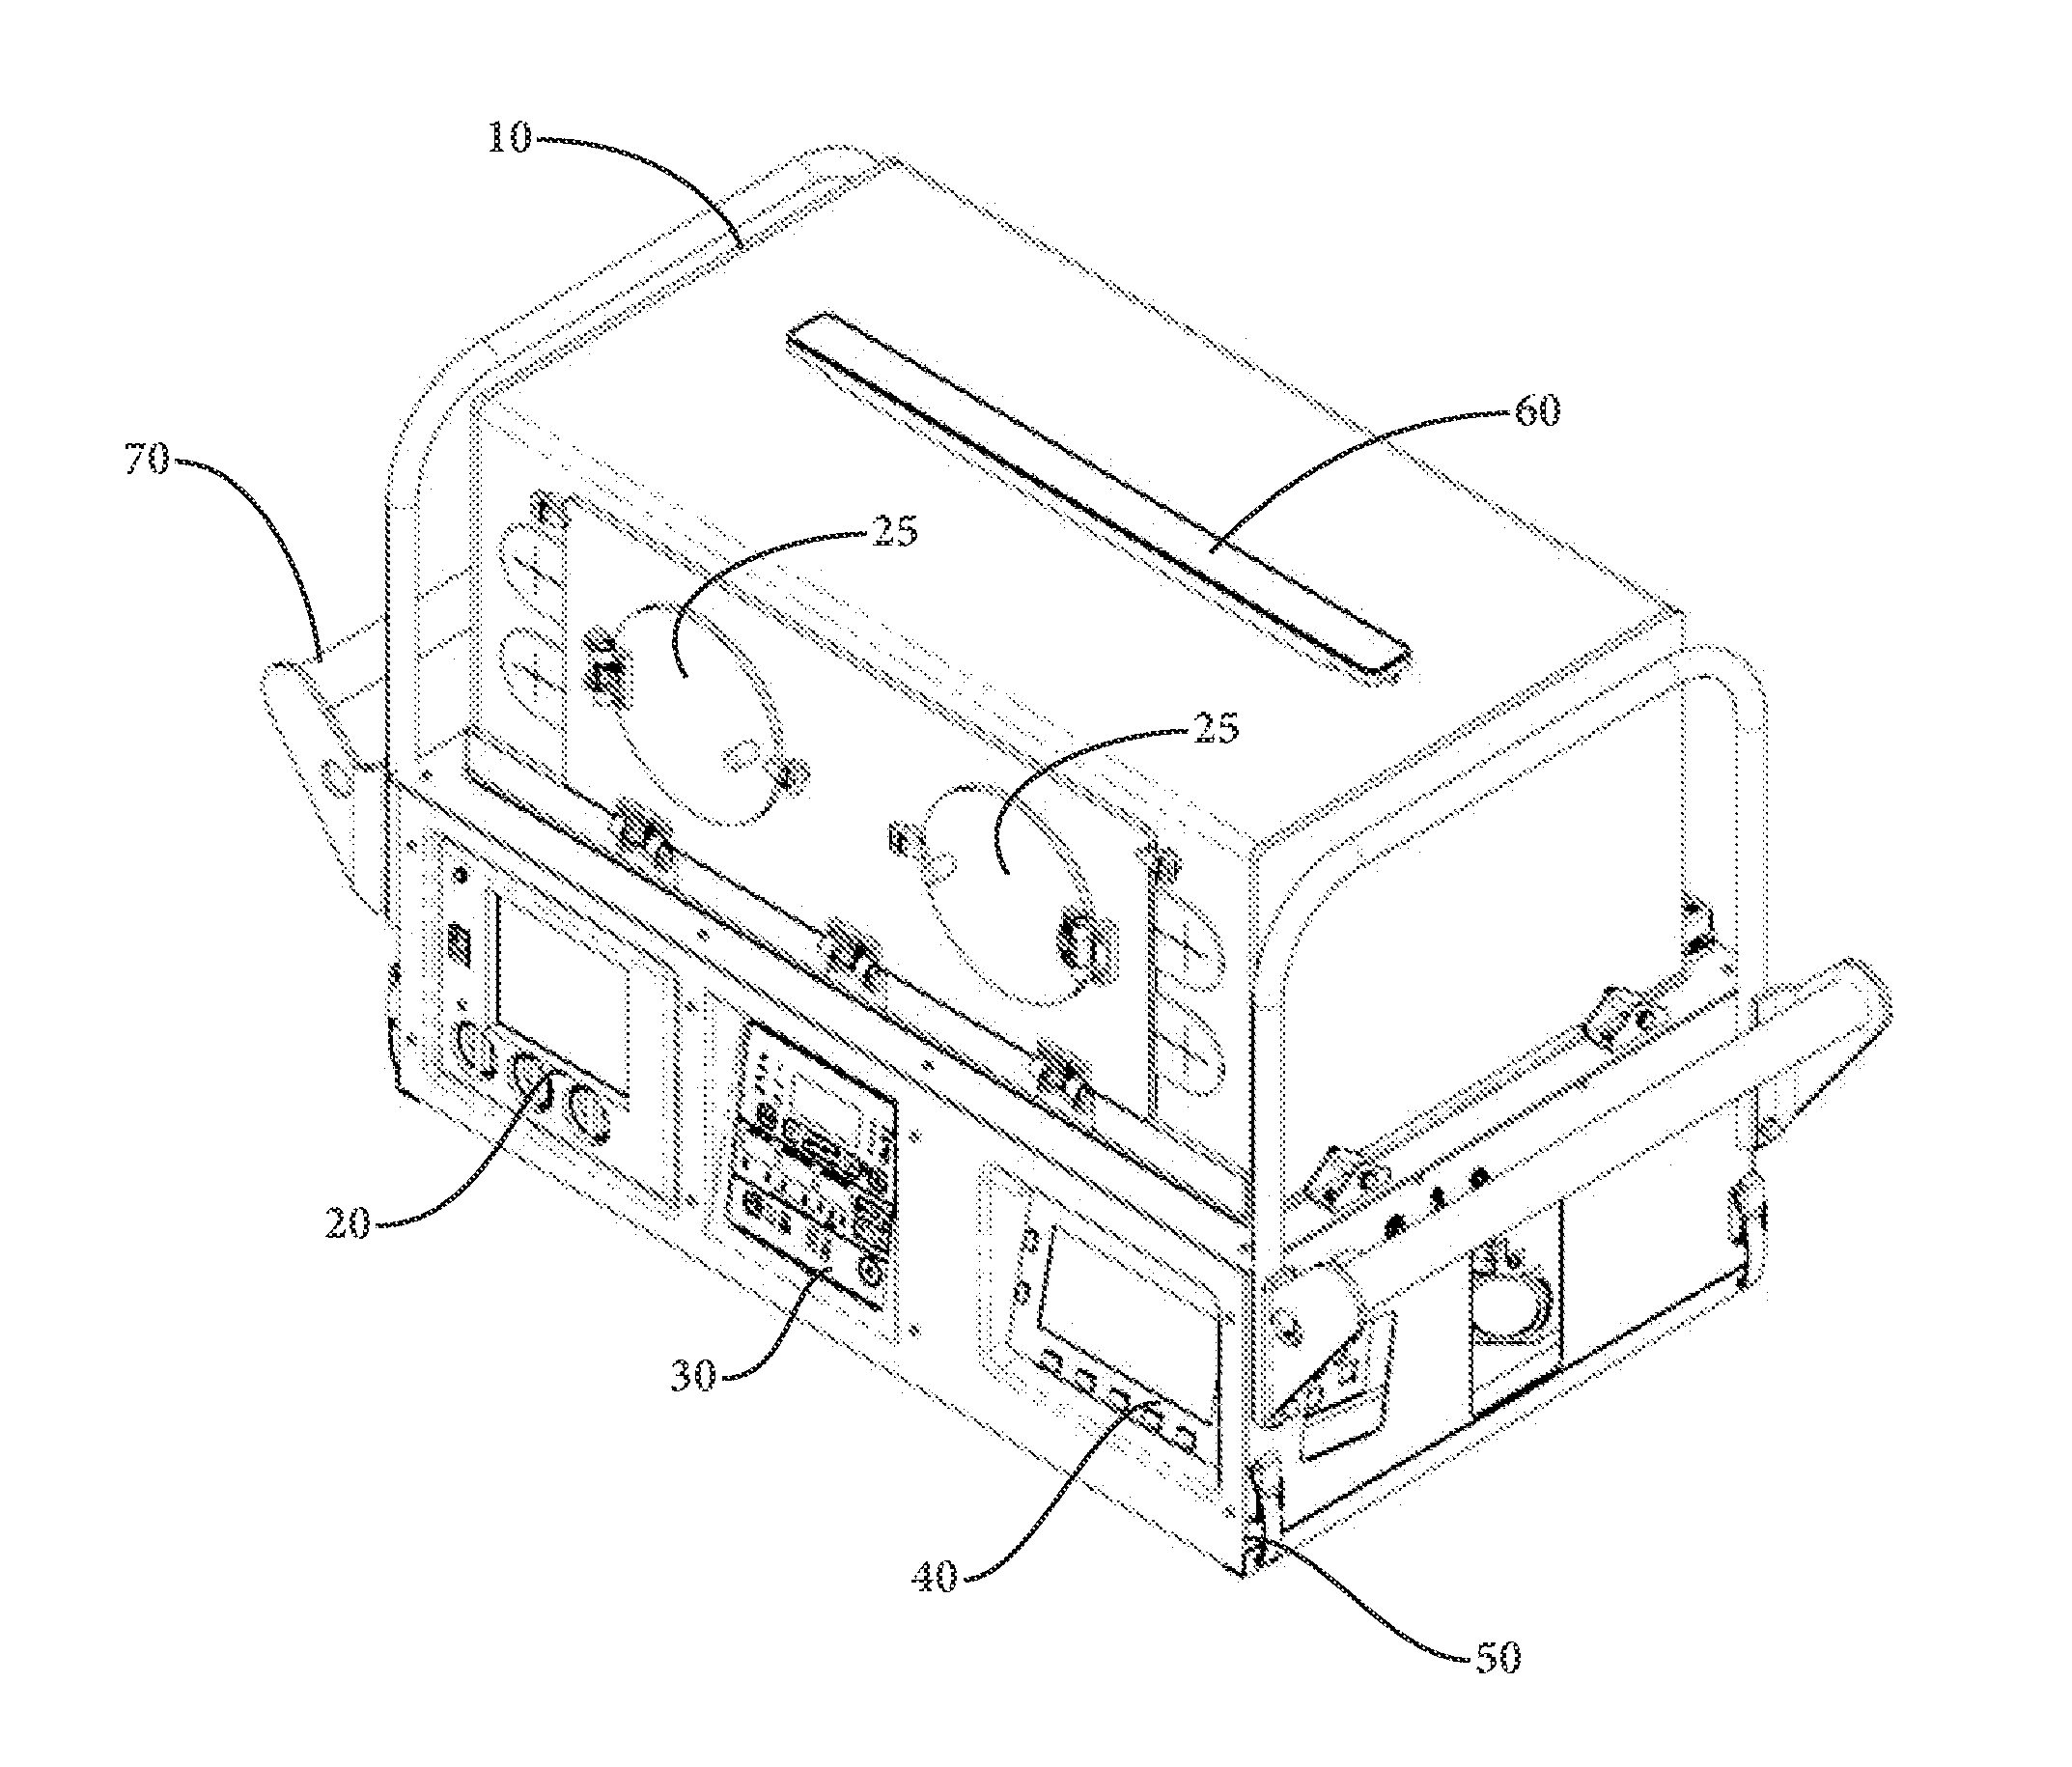 Infant Care Transport Device with Shock and Vibration System